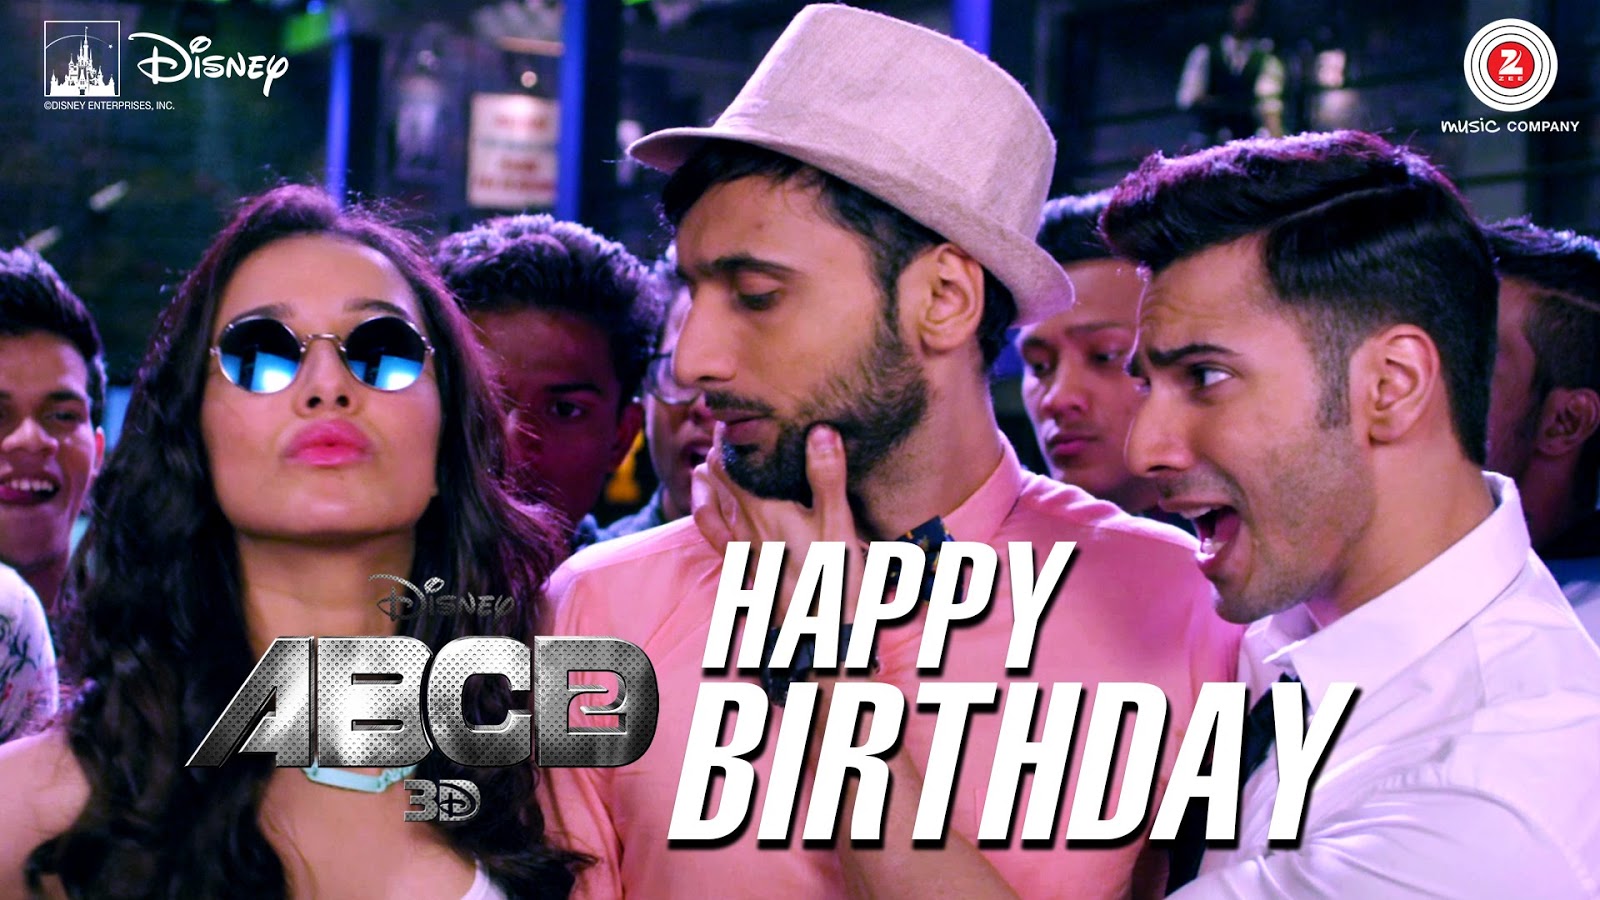 Abcd happy birthday song mp3 download